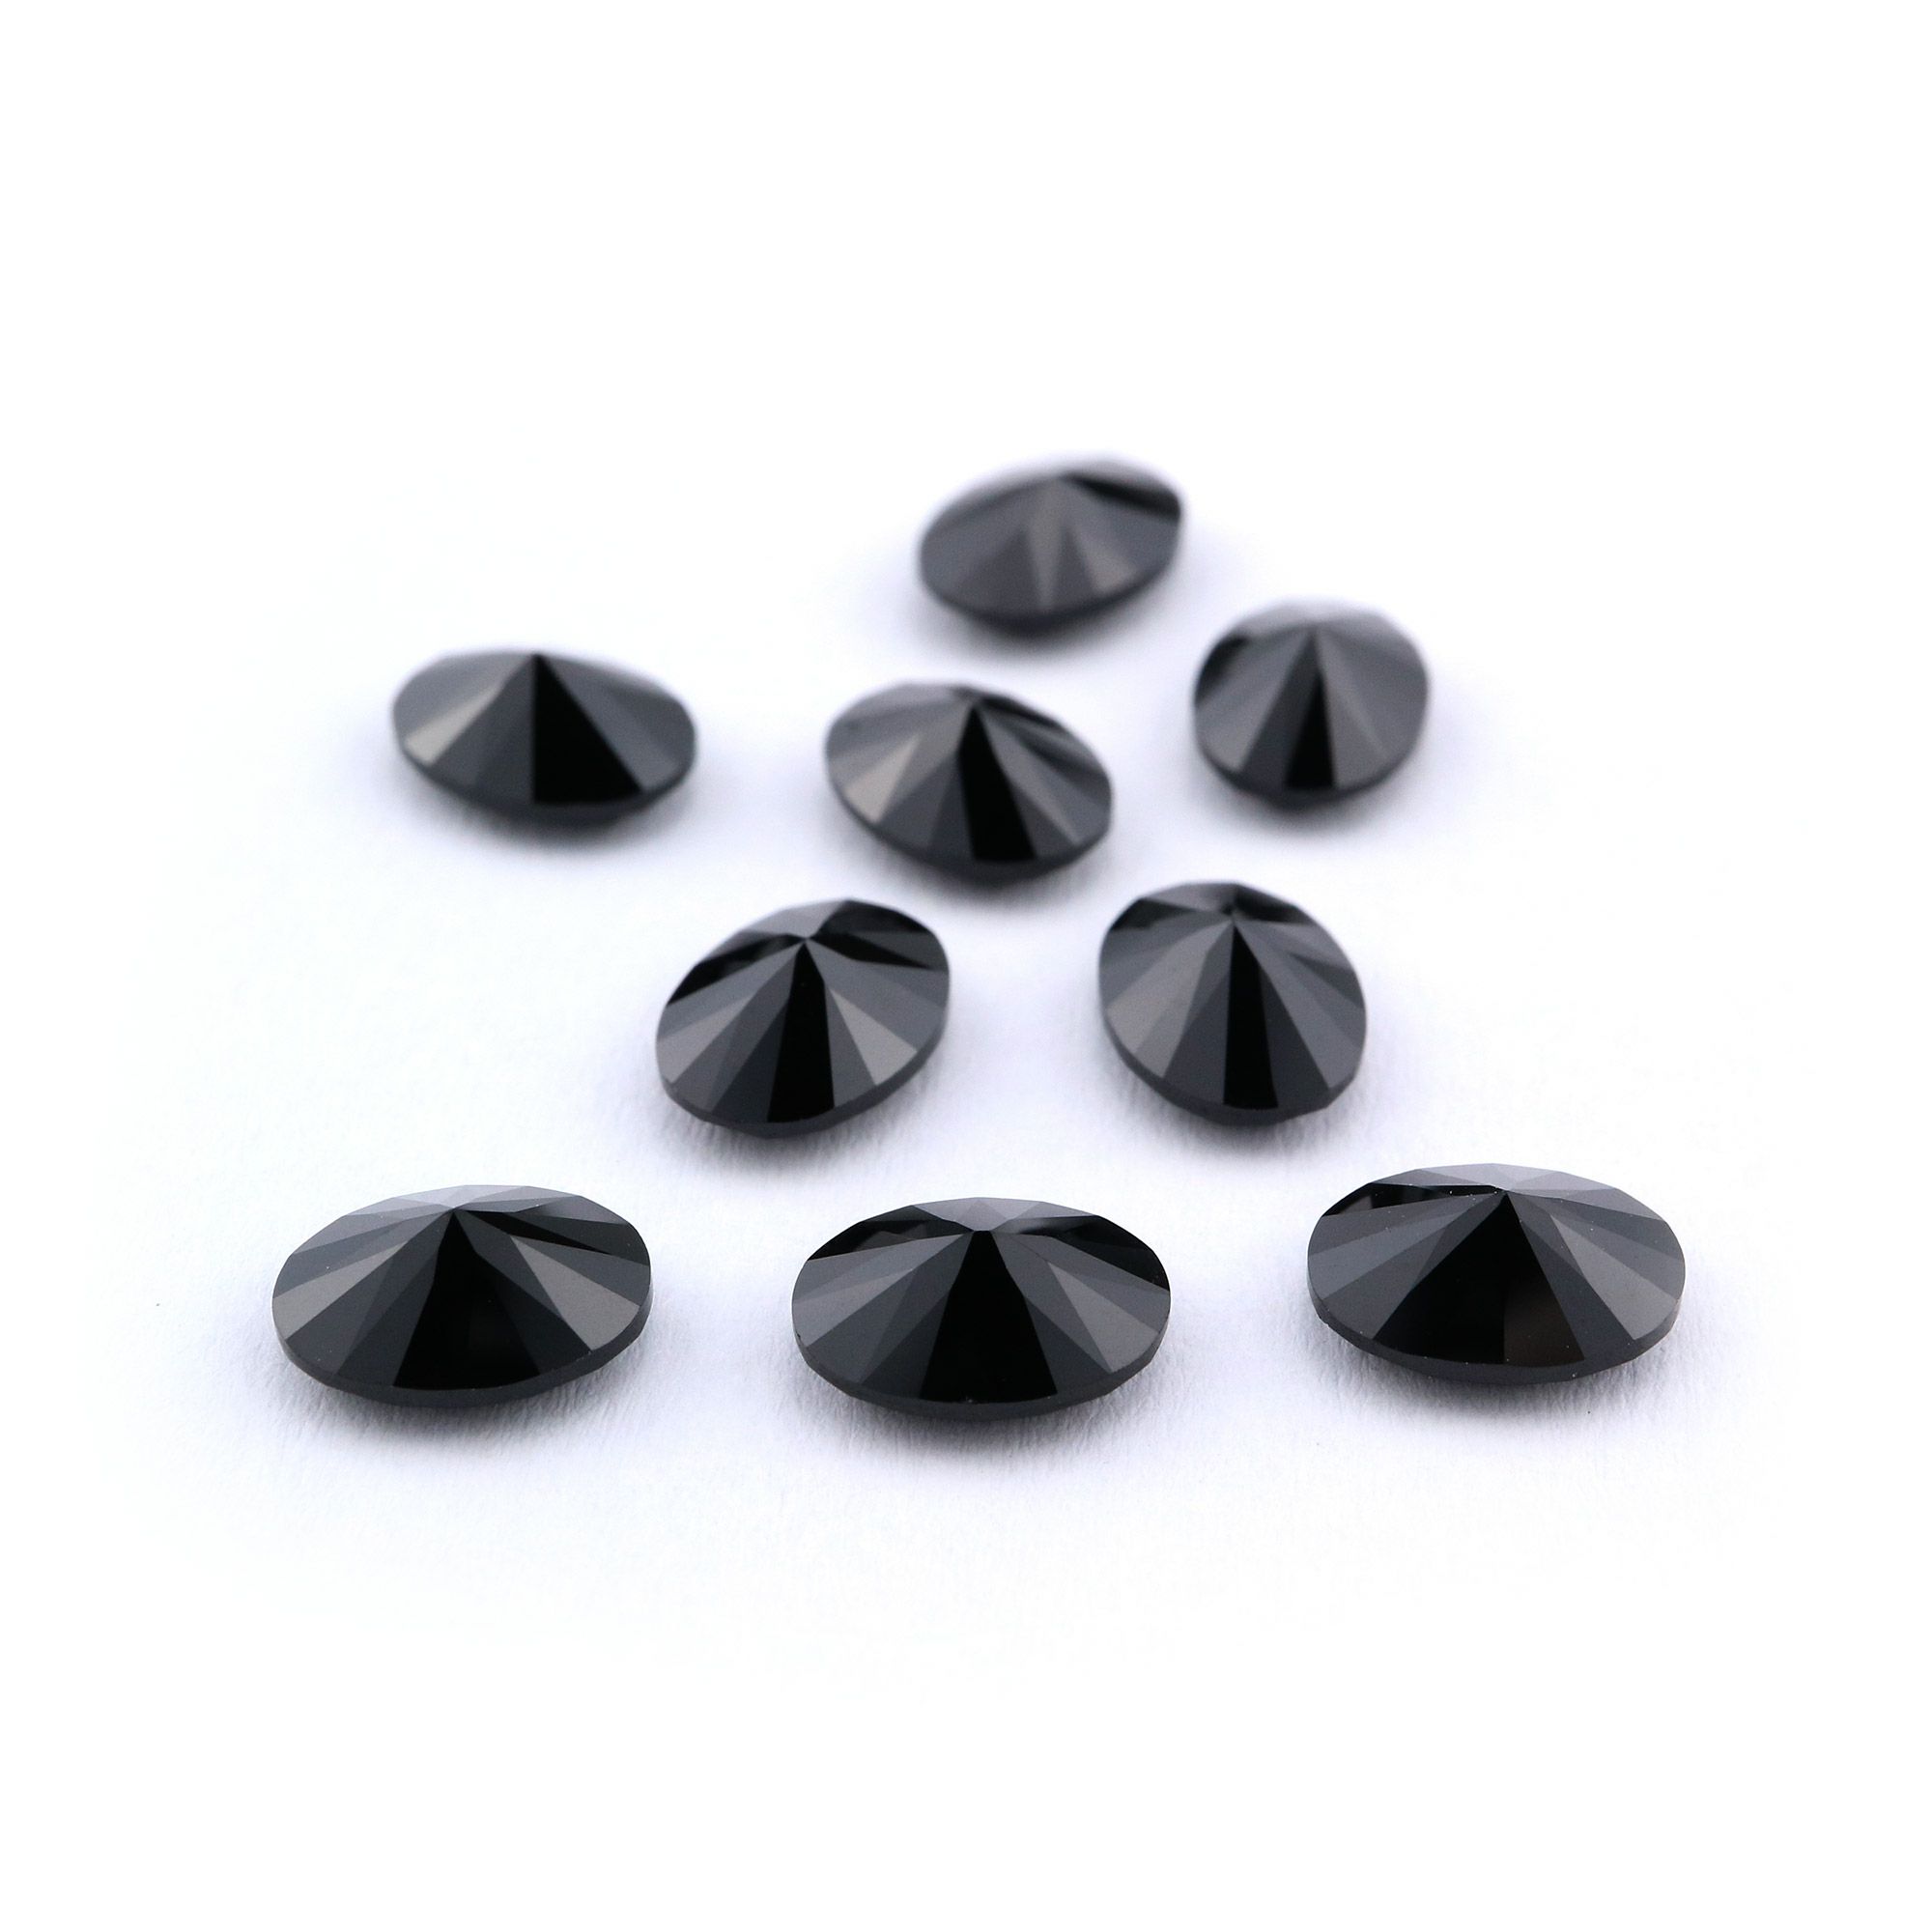 5Pcs Oval Black Spinel Faceted Cut Loose Gemstone Natural Semi Precious Stone DIY Jewelry Supplies 4120125 - Click Image to Close